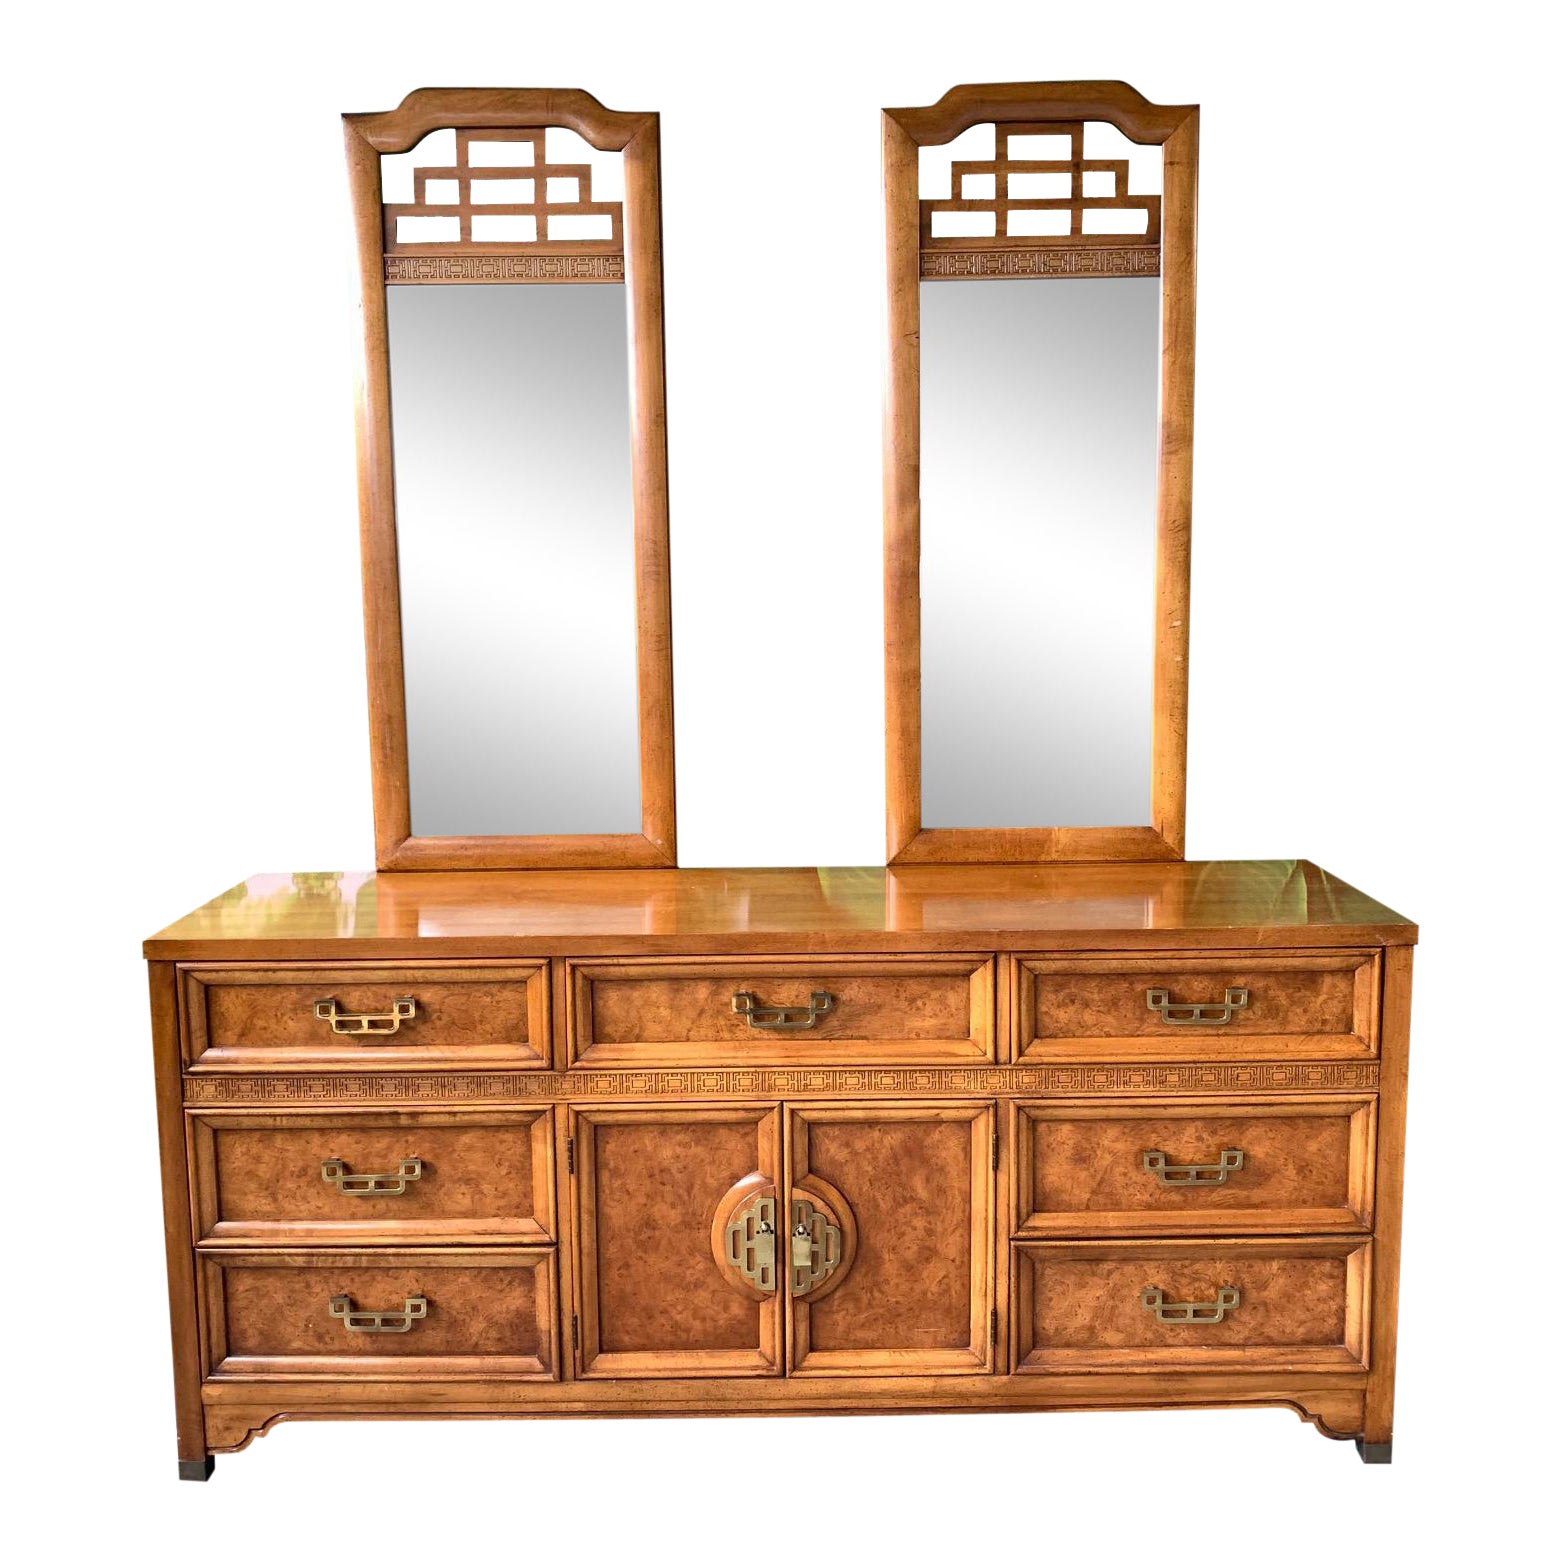 Asian Chinoiserie Burl Dresser "Mandarin" Collection by Henry Link